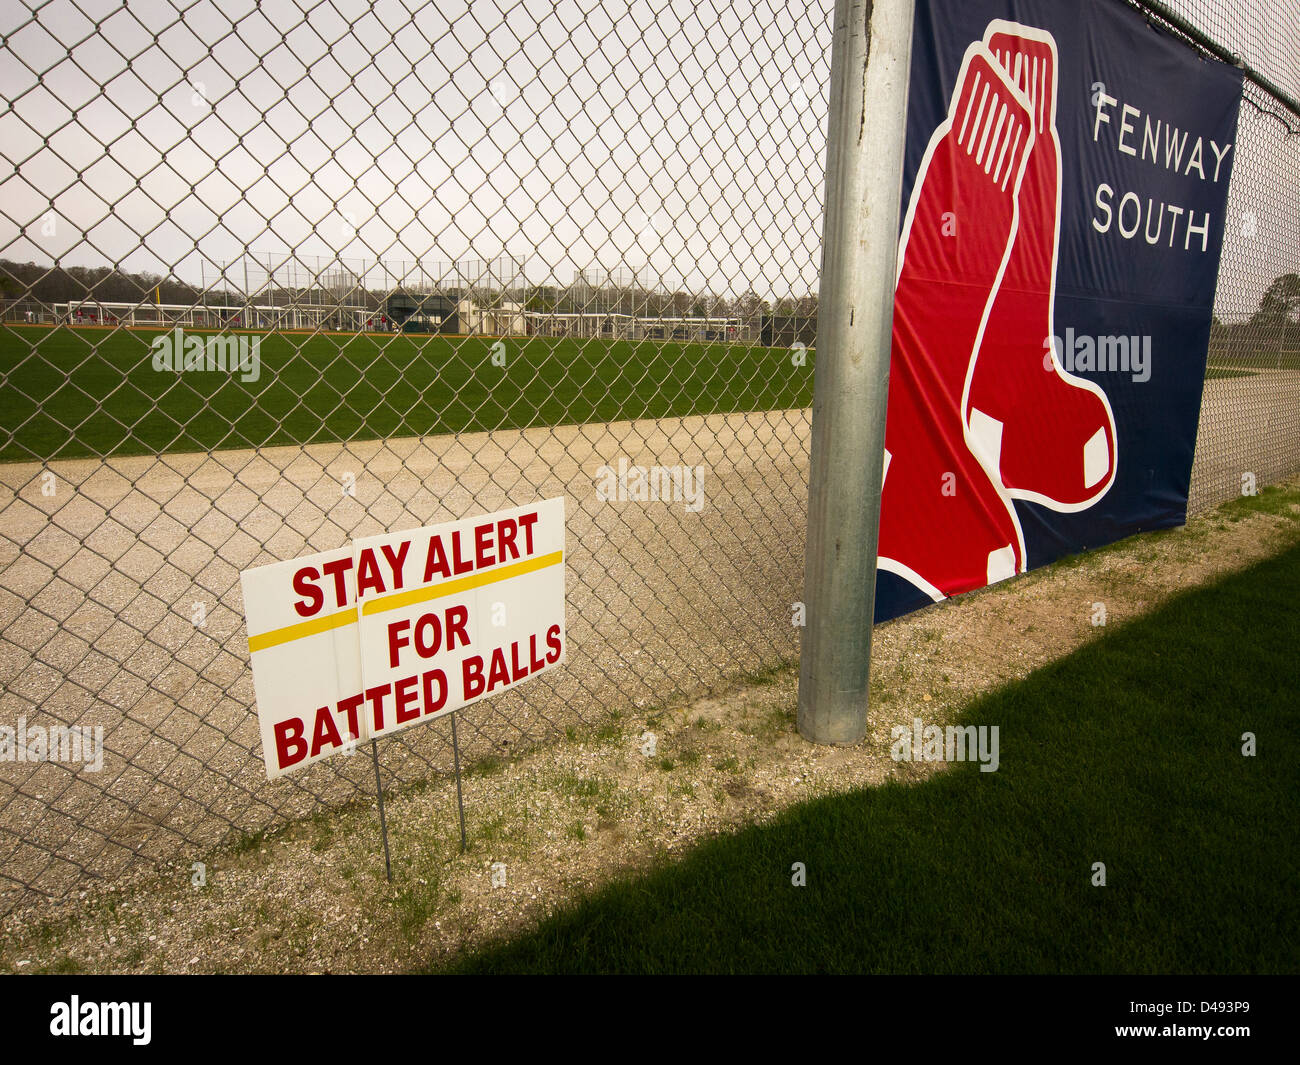 Since 1888, Boston Red Sox get ready for season opener in April in warm Florida, where a sign warns players and fans. Stock Photo